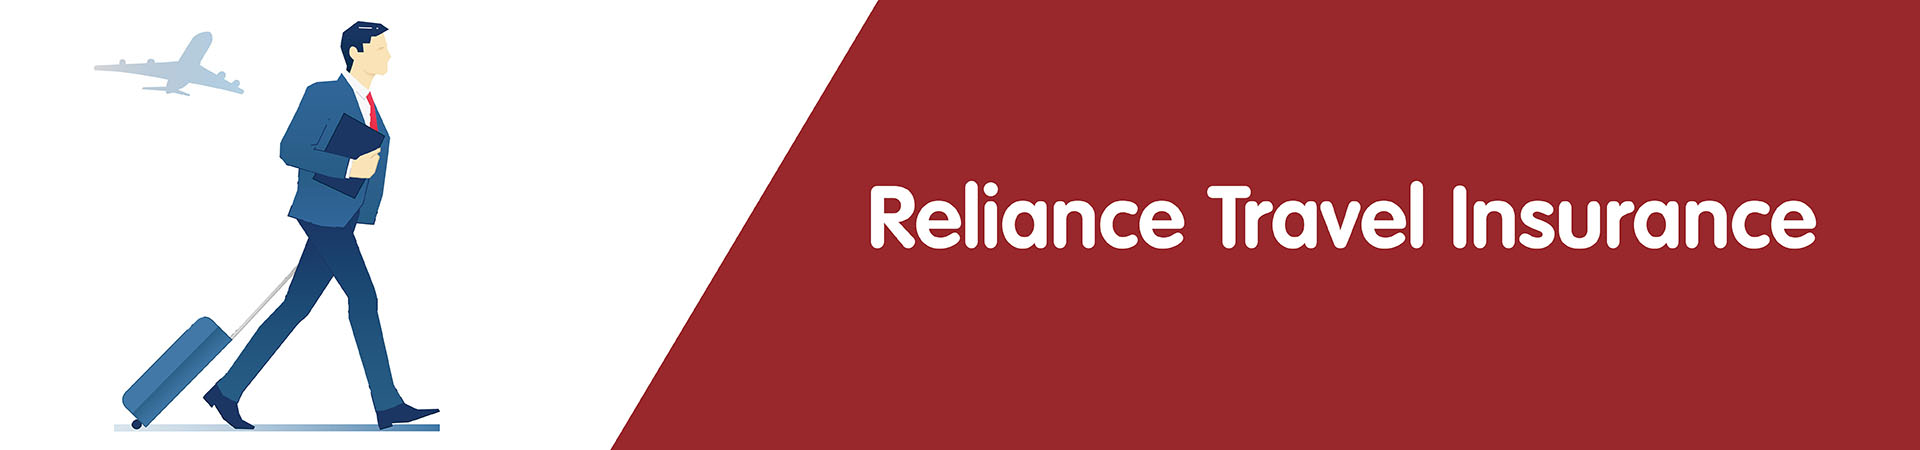 reliance travel policy download